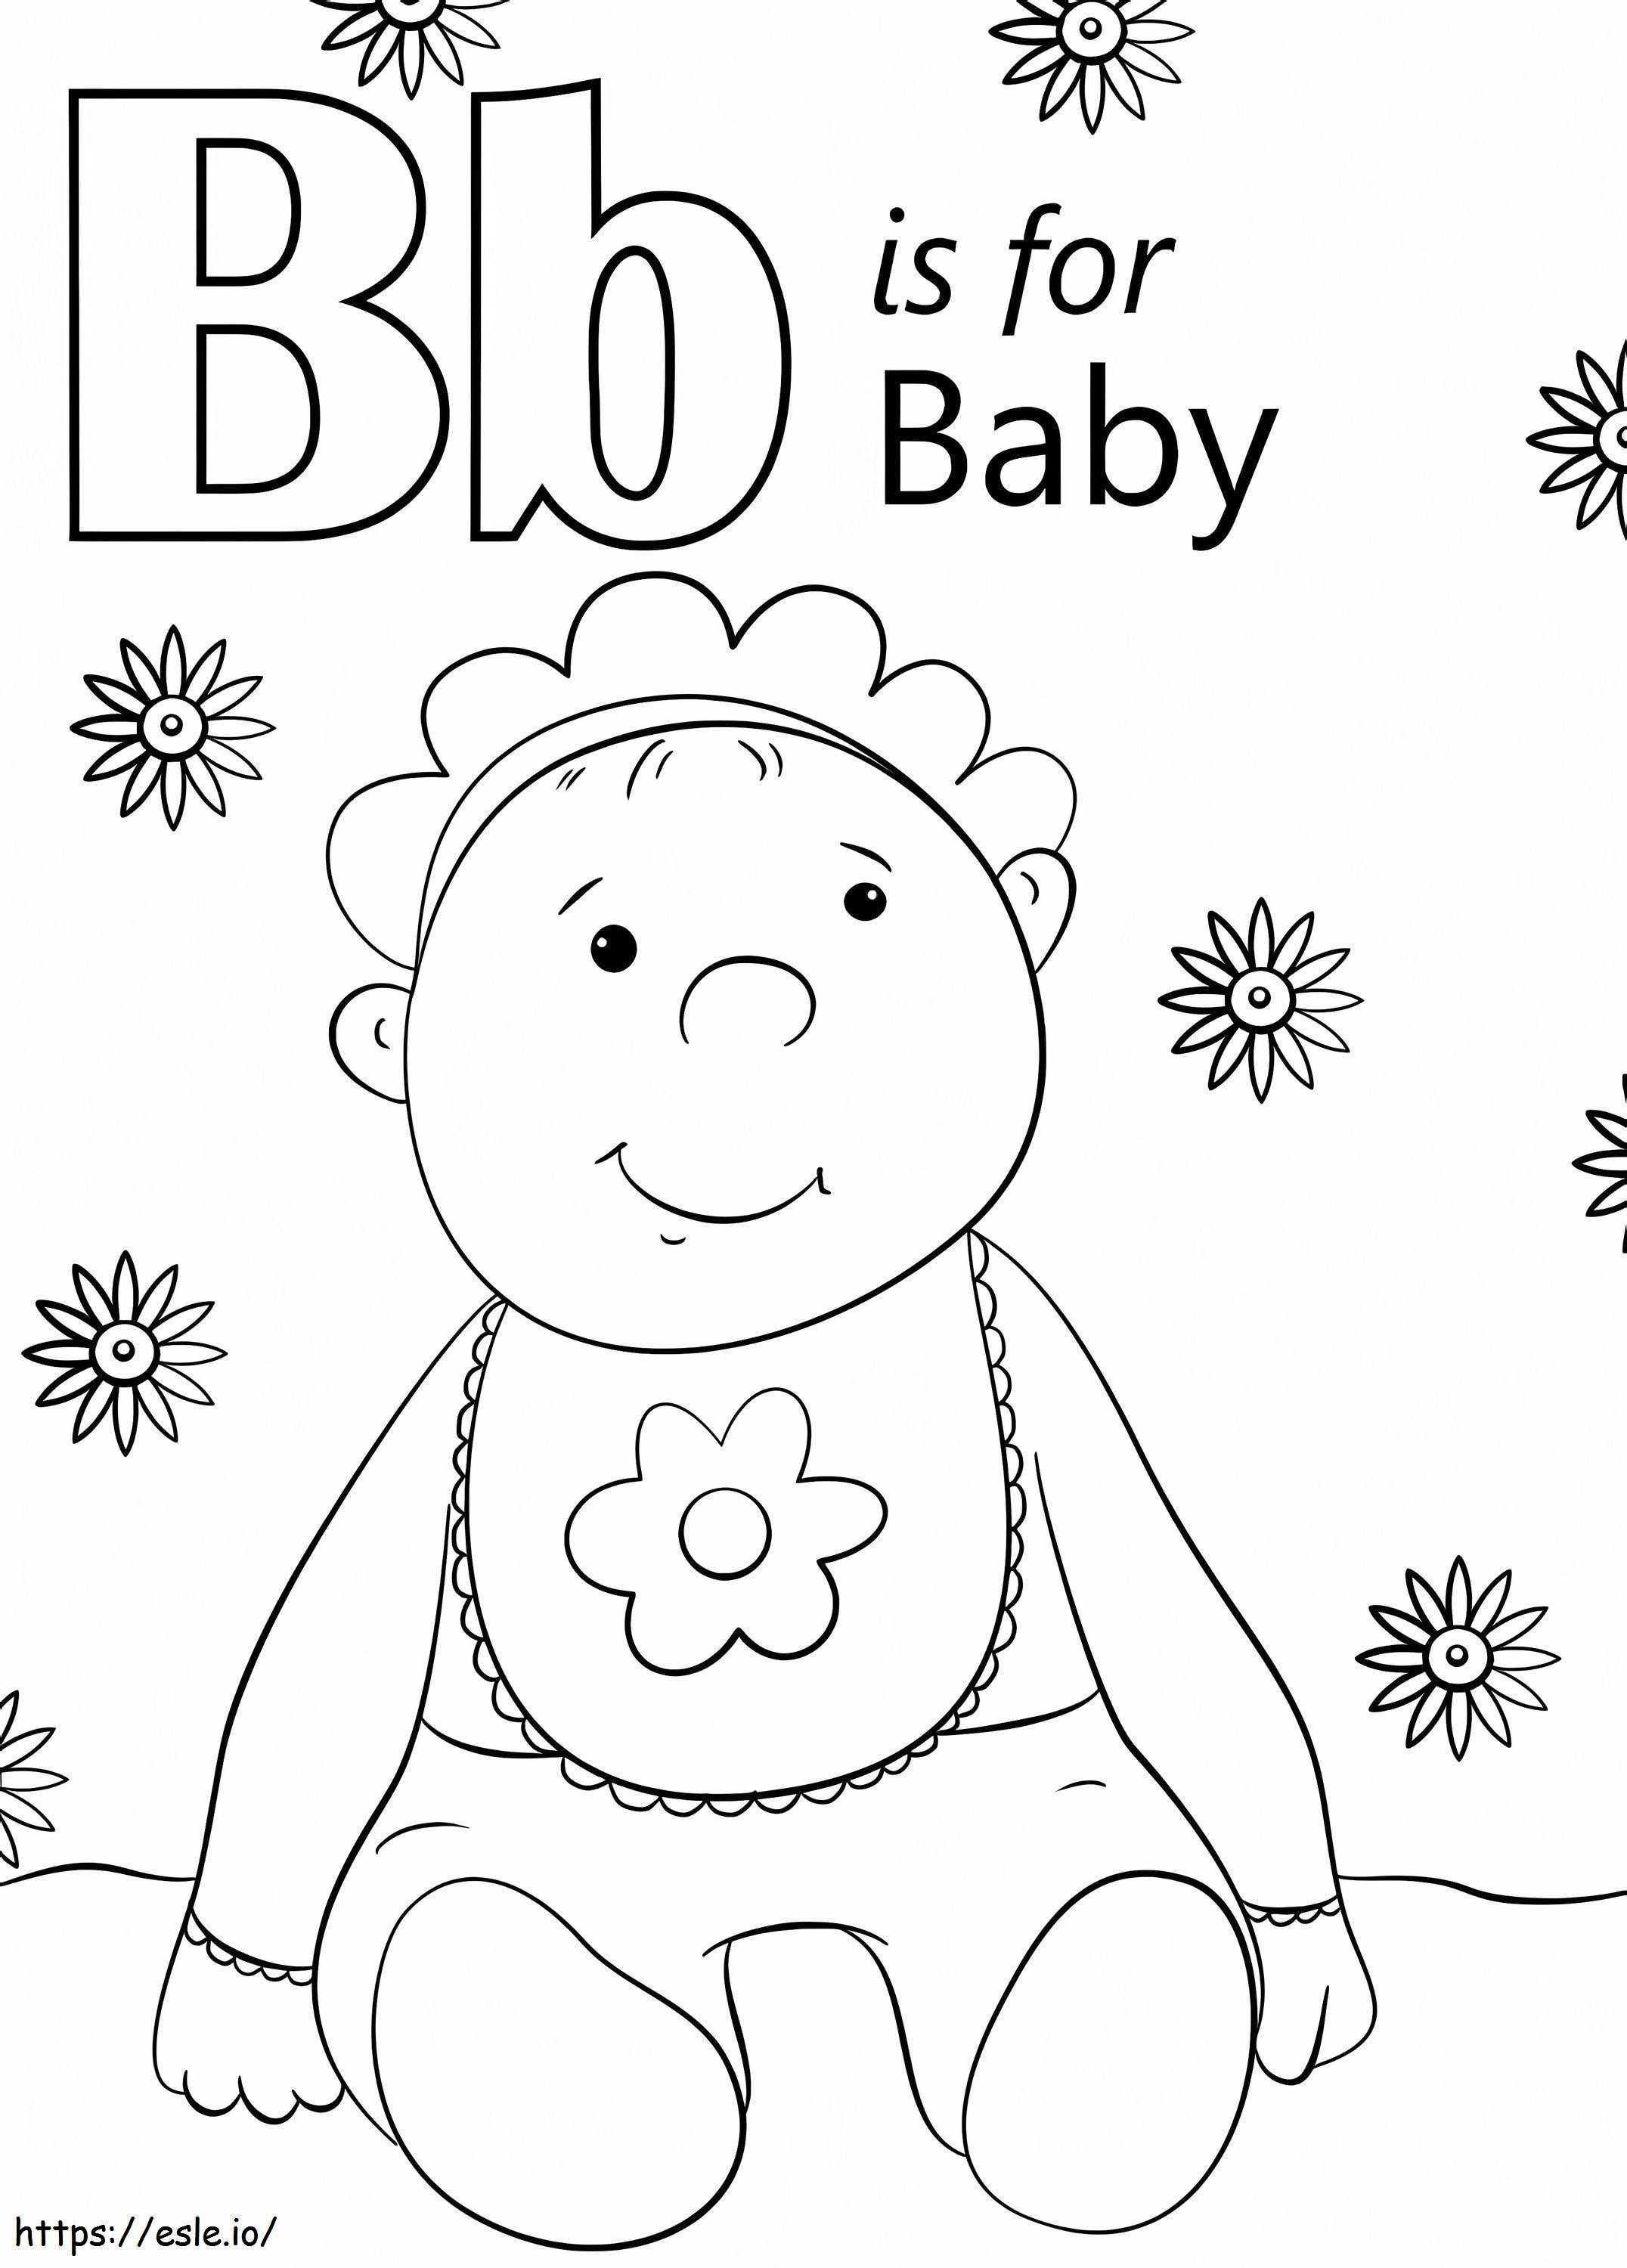 Baby Letter B coloring page